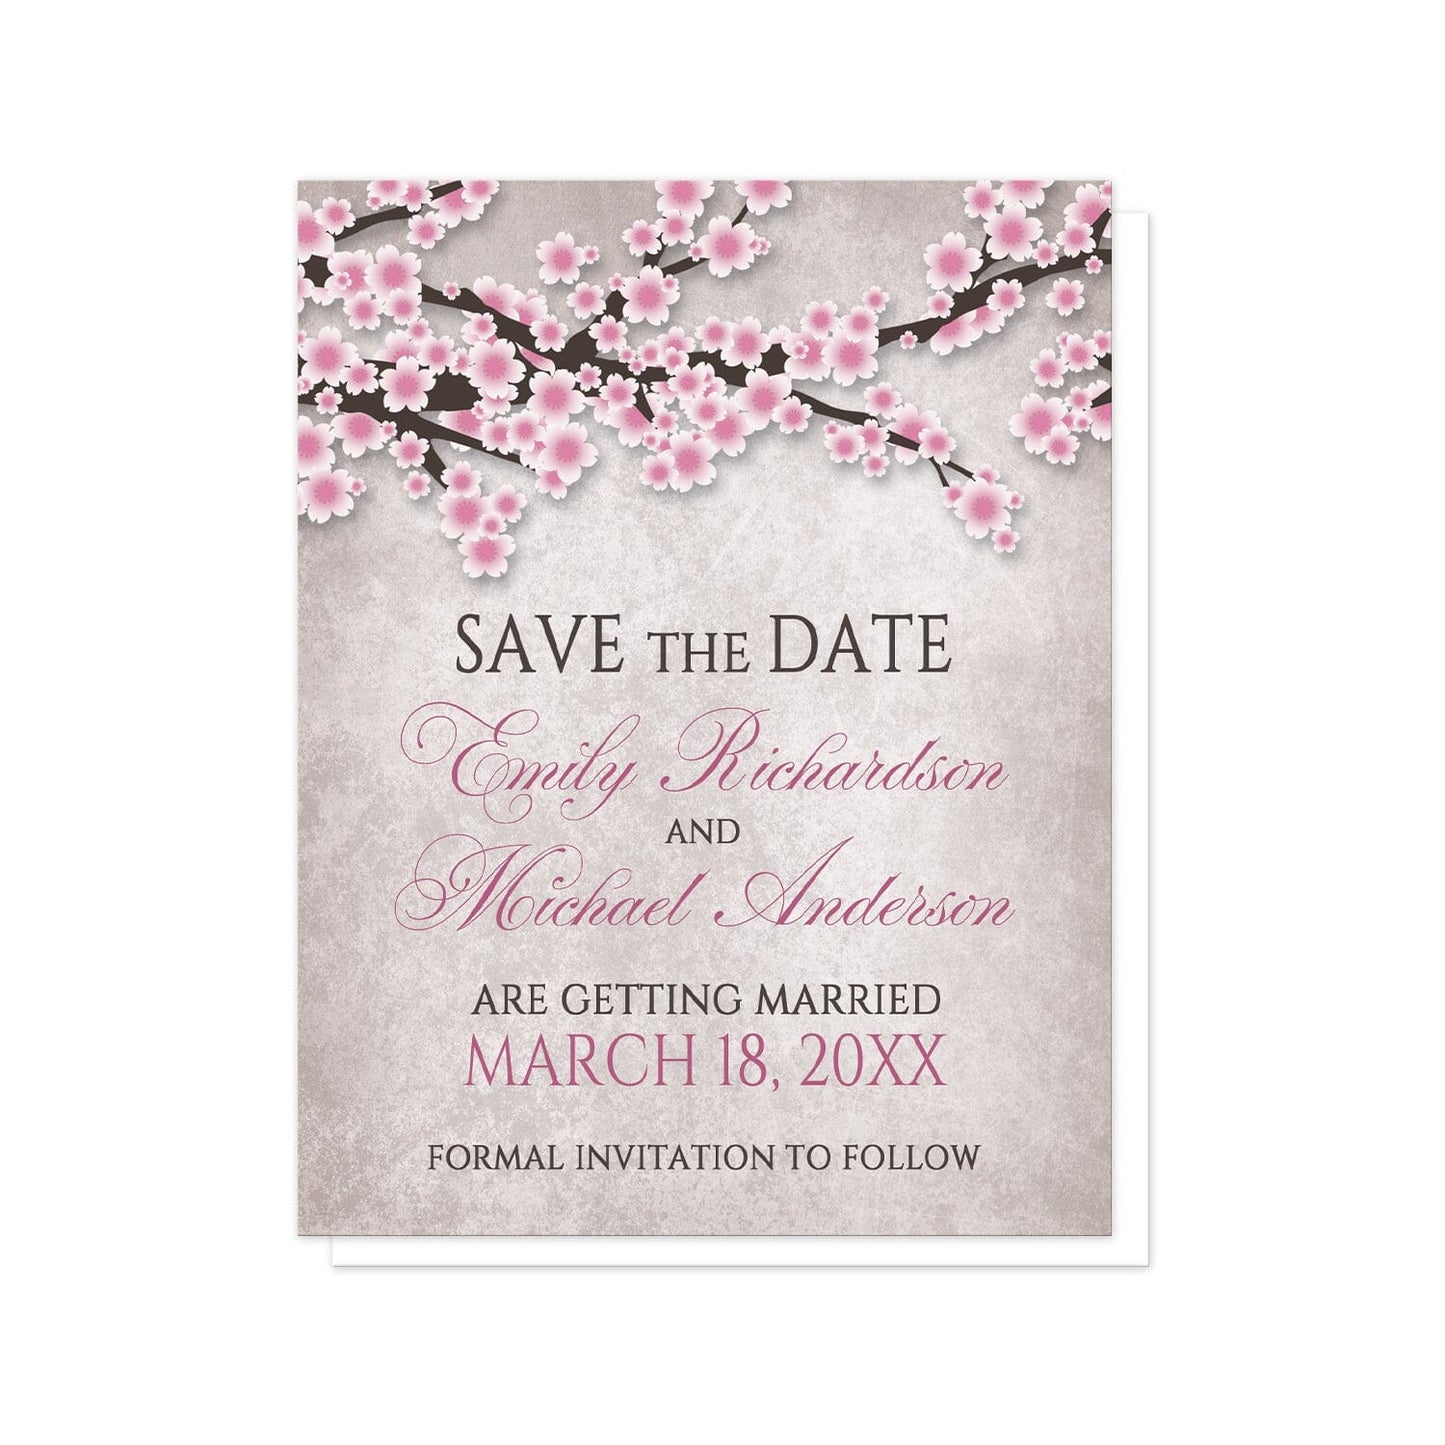 Rustic Pink Cherry Blossom Save the Date Cards at Artistically Invited. Rustic pink cherry blossom save the date cards featuring an illustration of pink and white with dark brown cherry blossom branches along the top. Your personalized wedding date details are custom printed in pink and dark brown over a stony grayish brown background below the pretty cherry blossom branches. 